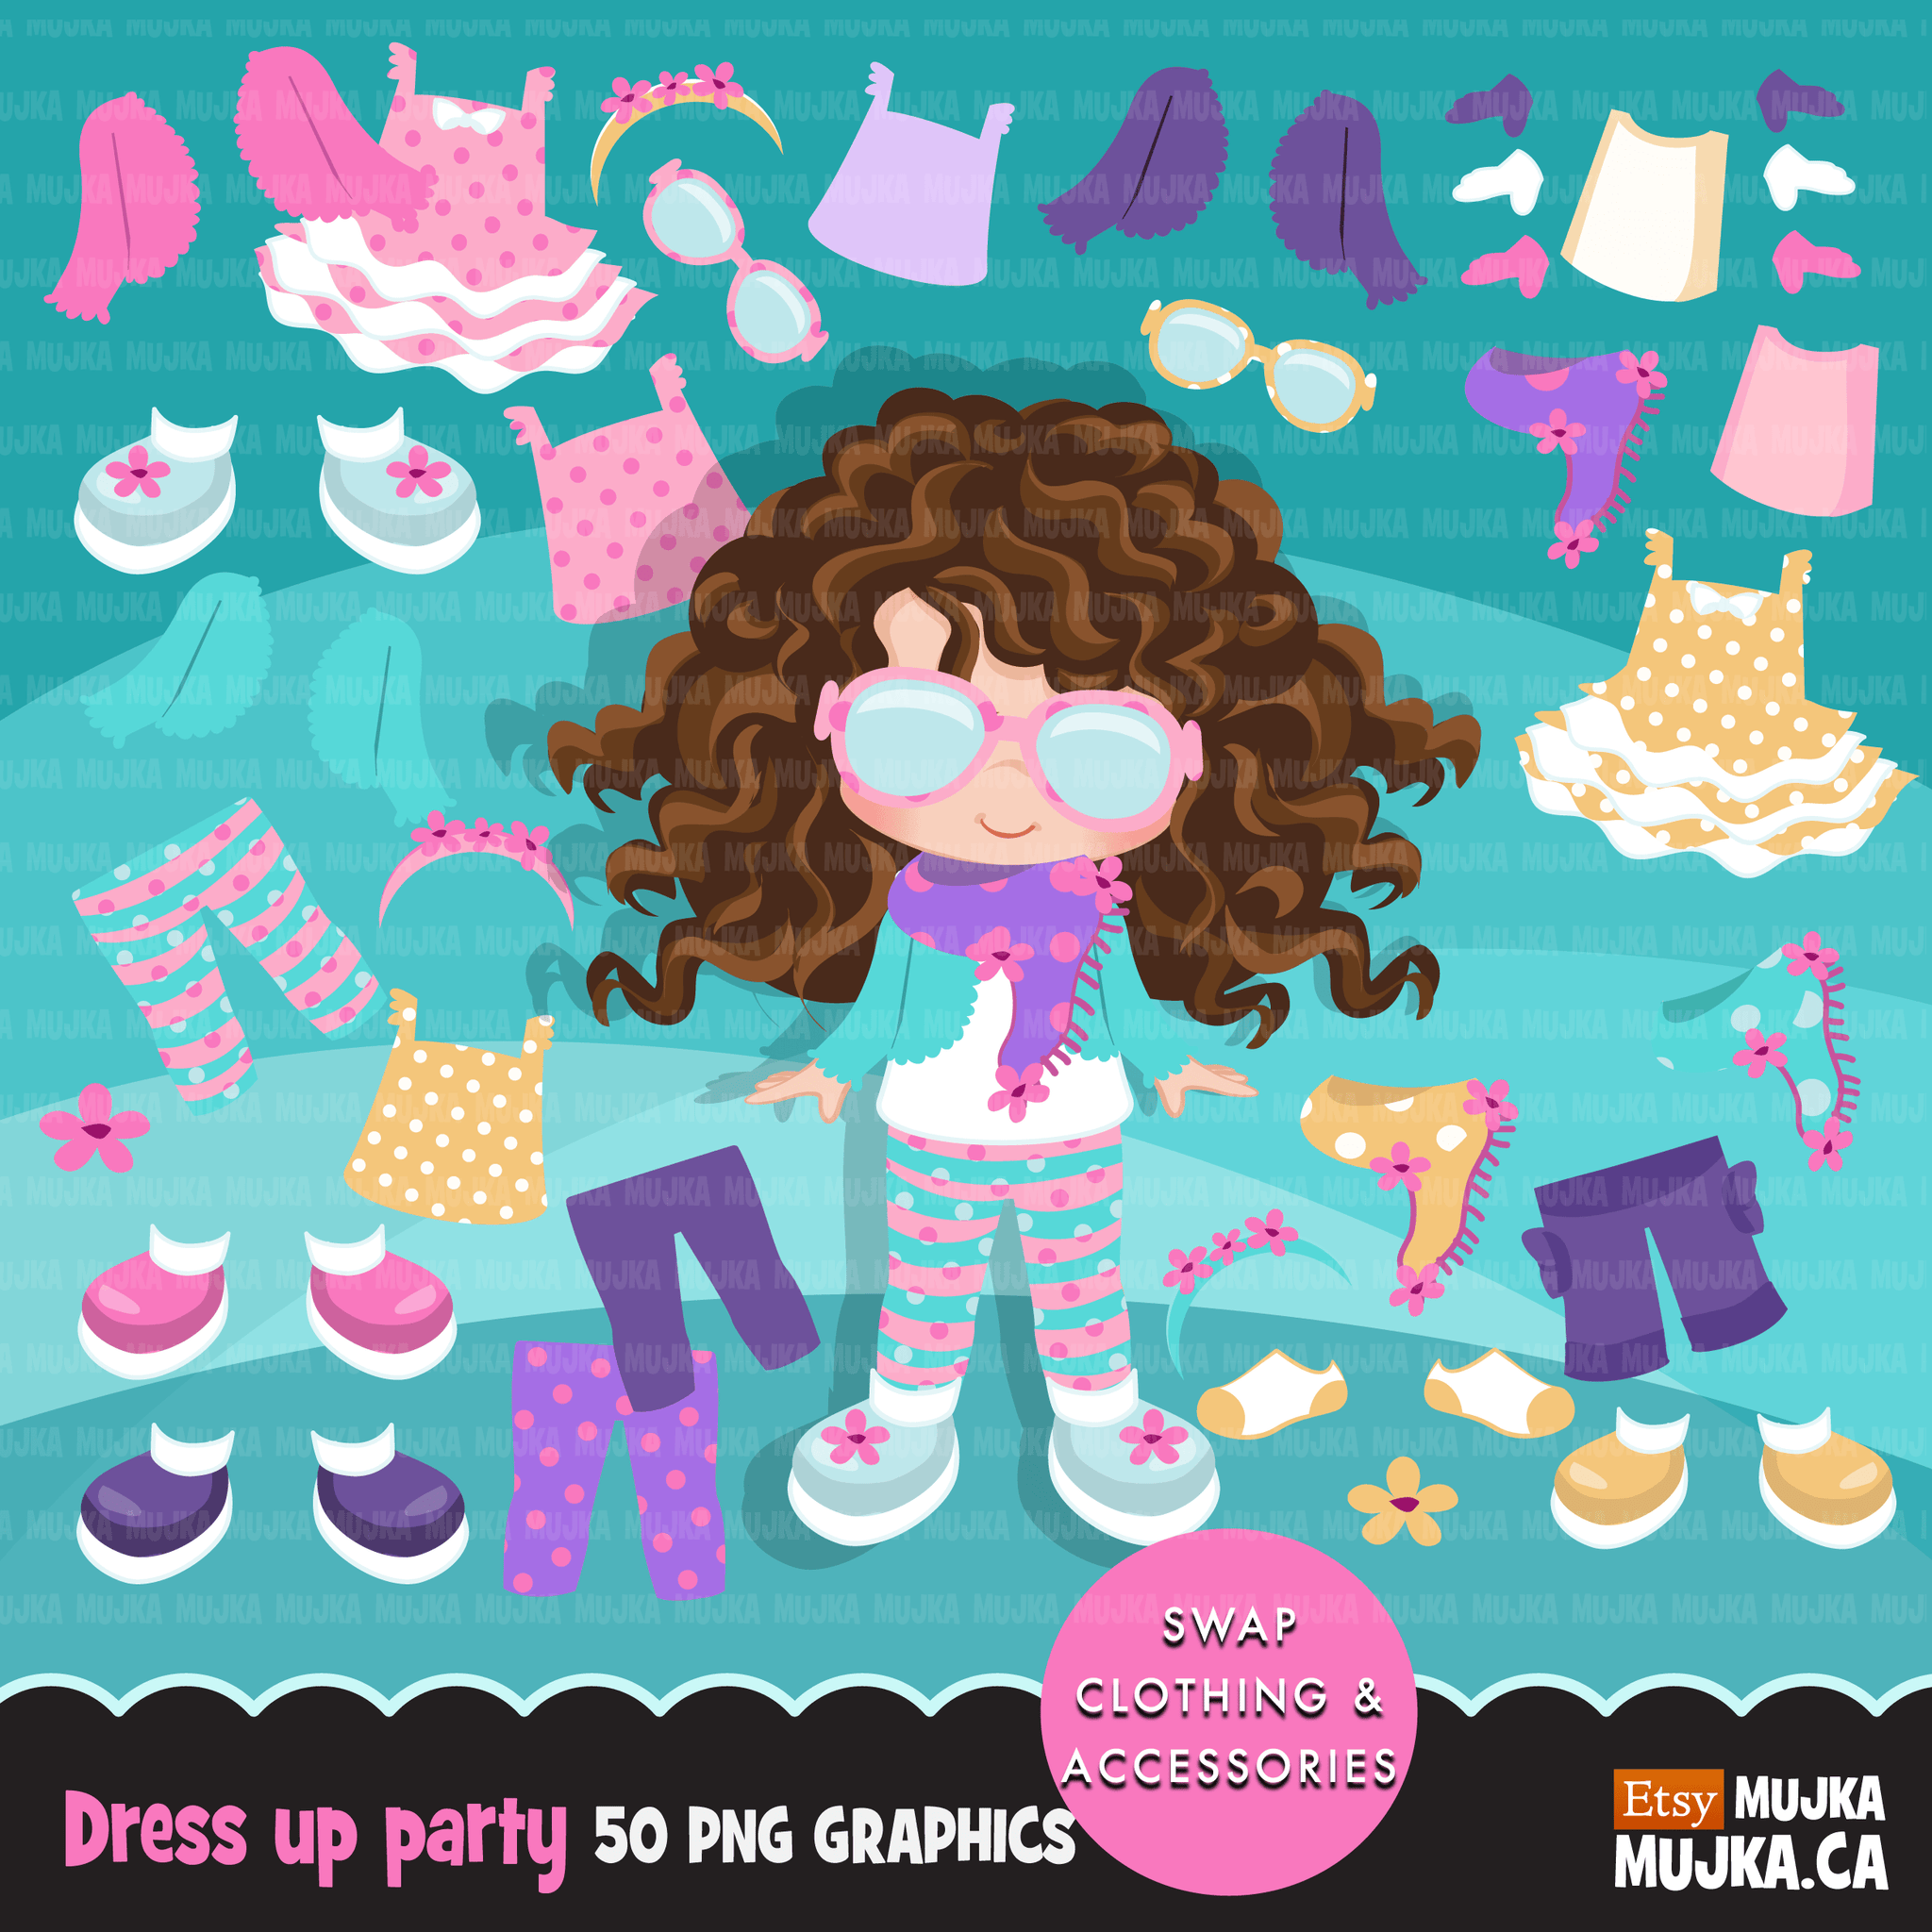 Paper Doll clipart Bundle, Dress up graphics, fashion outfits for kids girl and boy png sublimation graphics